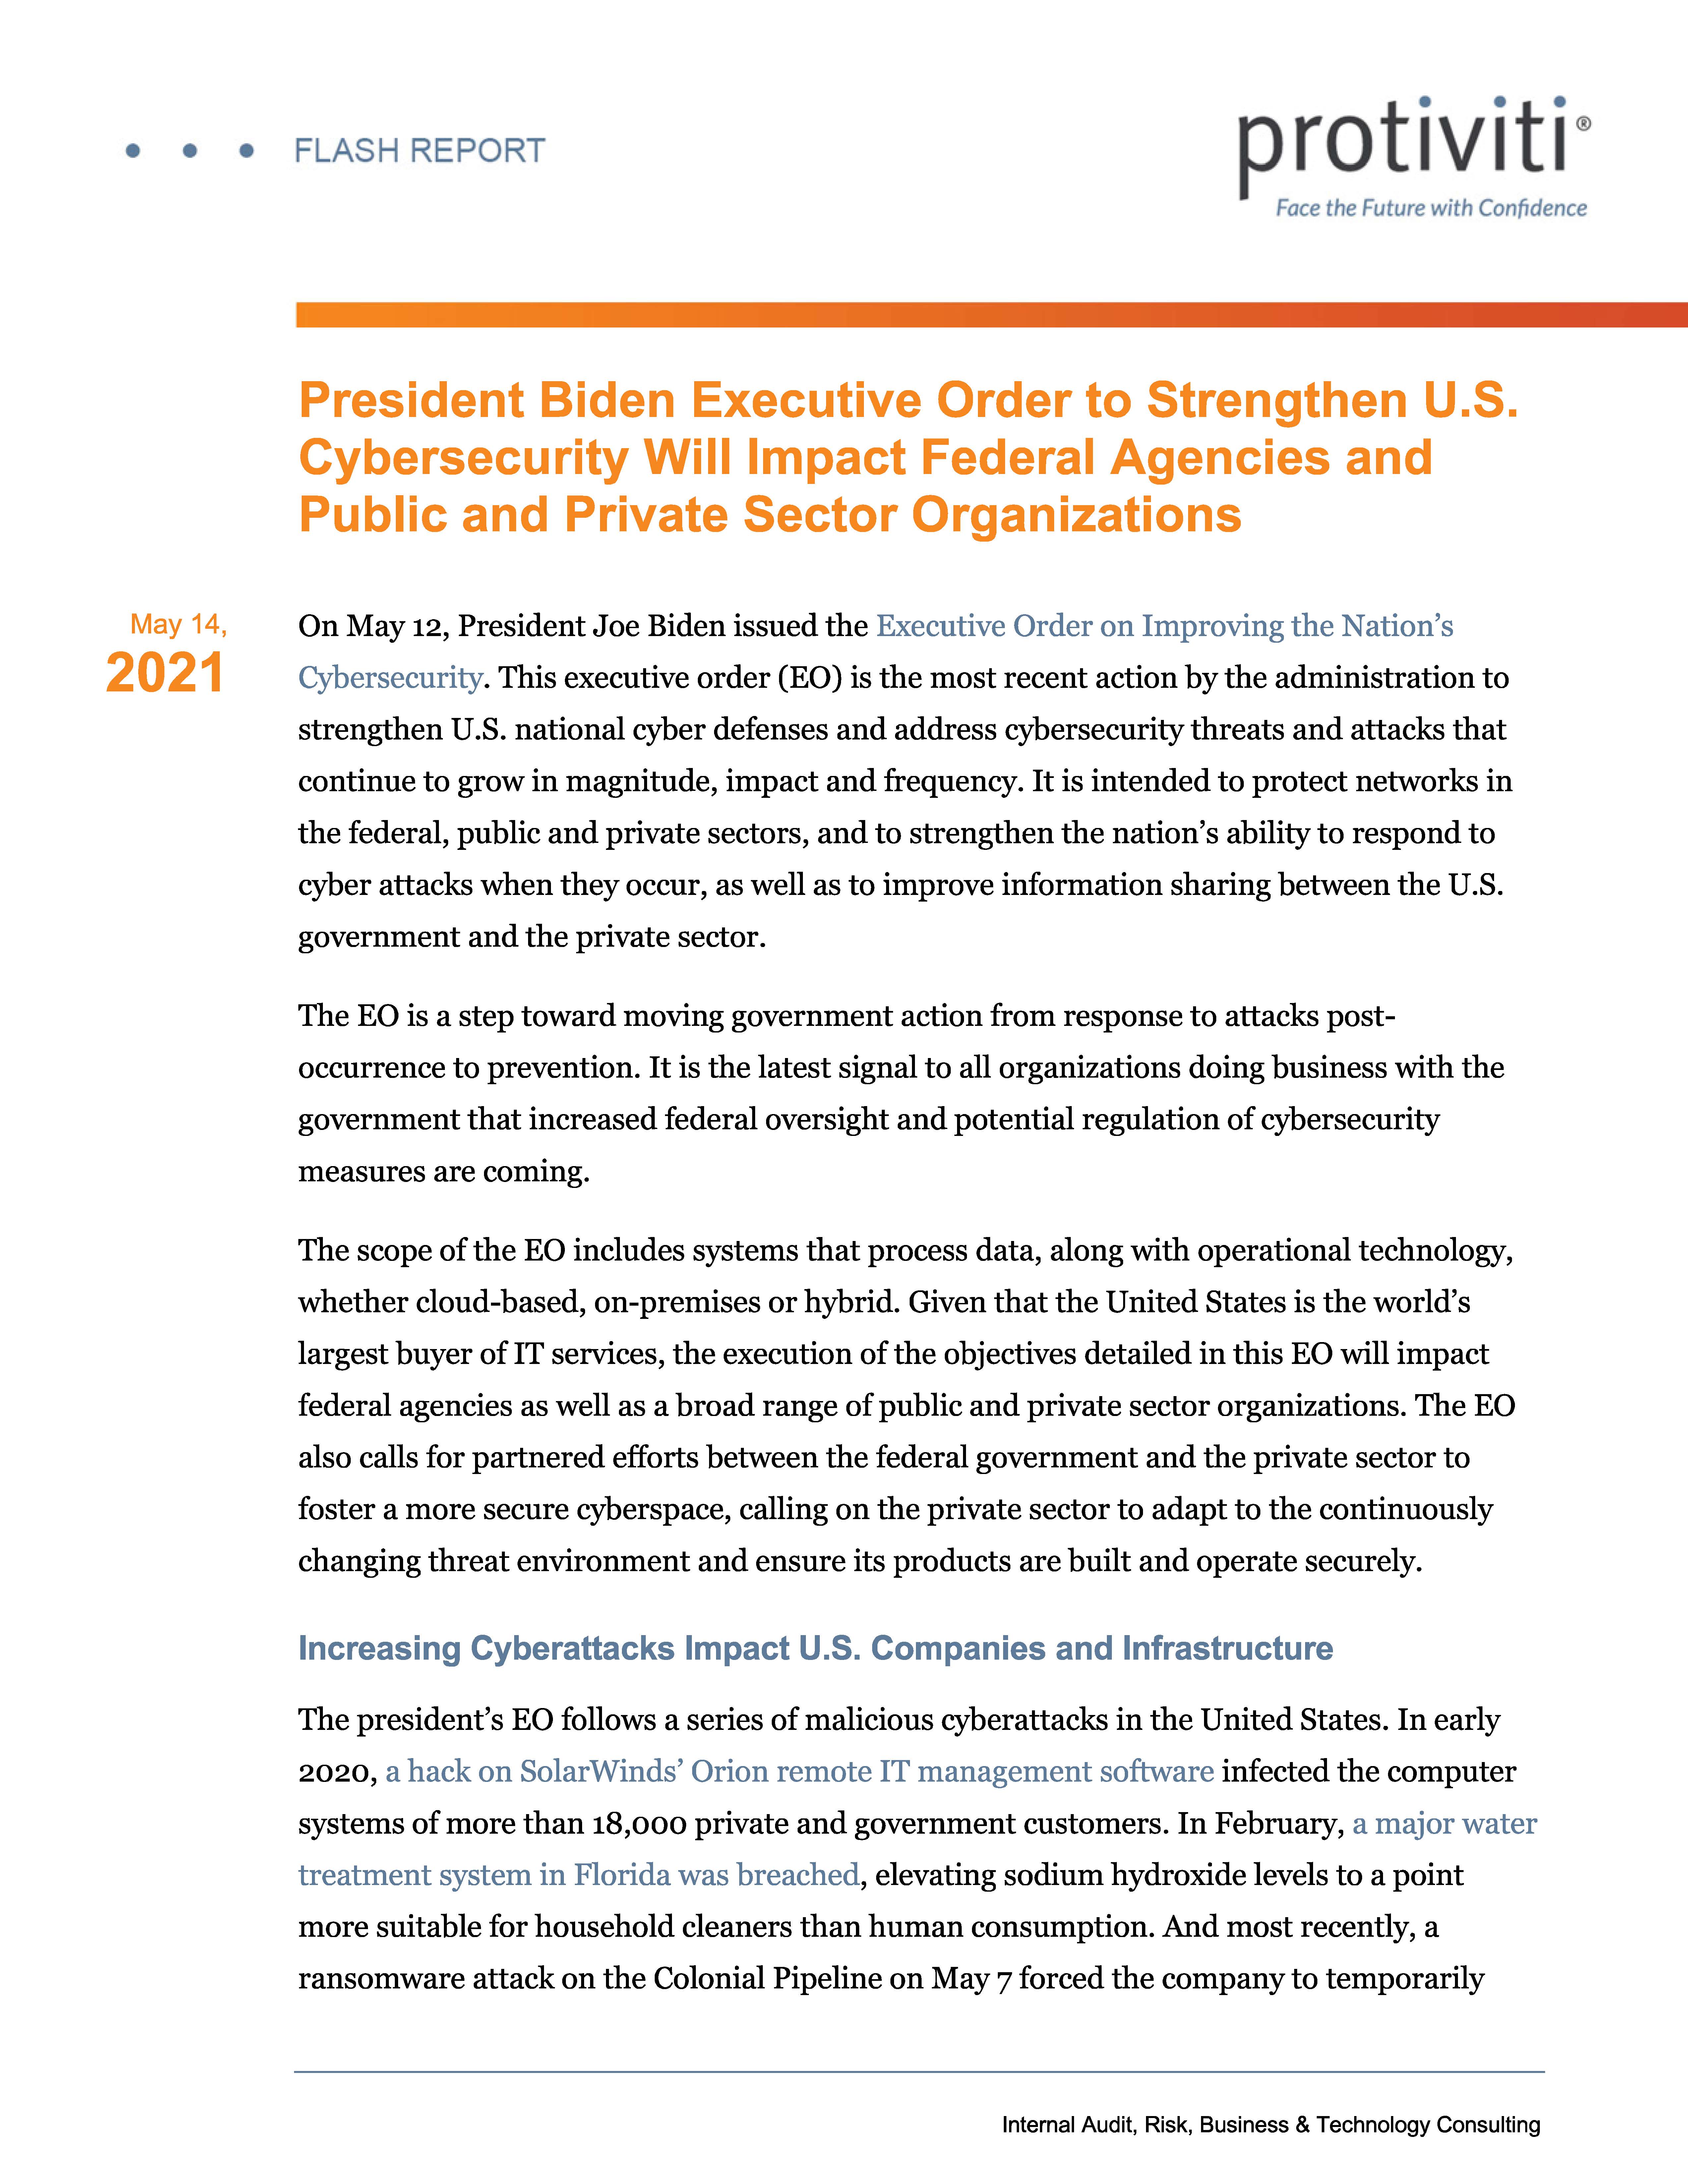 Screenshot of the first page of President Biden Executive Order to Strengthen U.S. Cybersecurity Will Impact Federal Agencies and Public and Private Sector Organizations